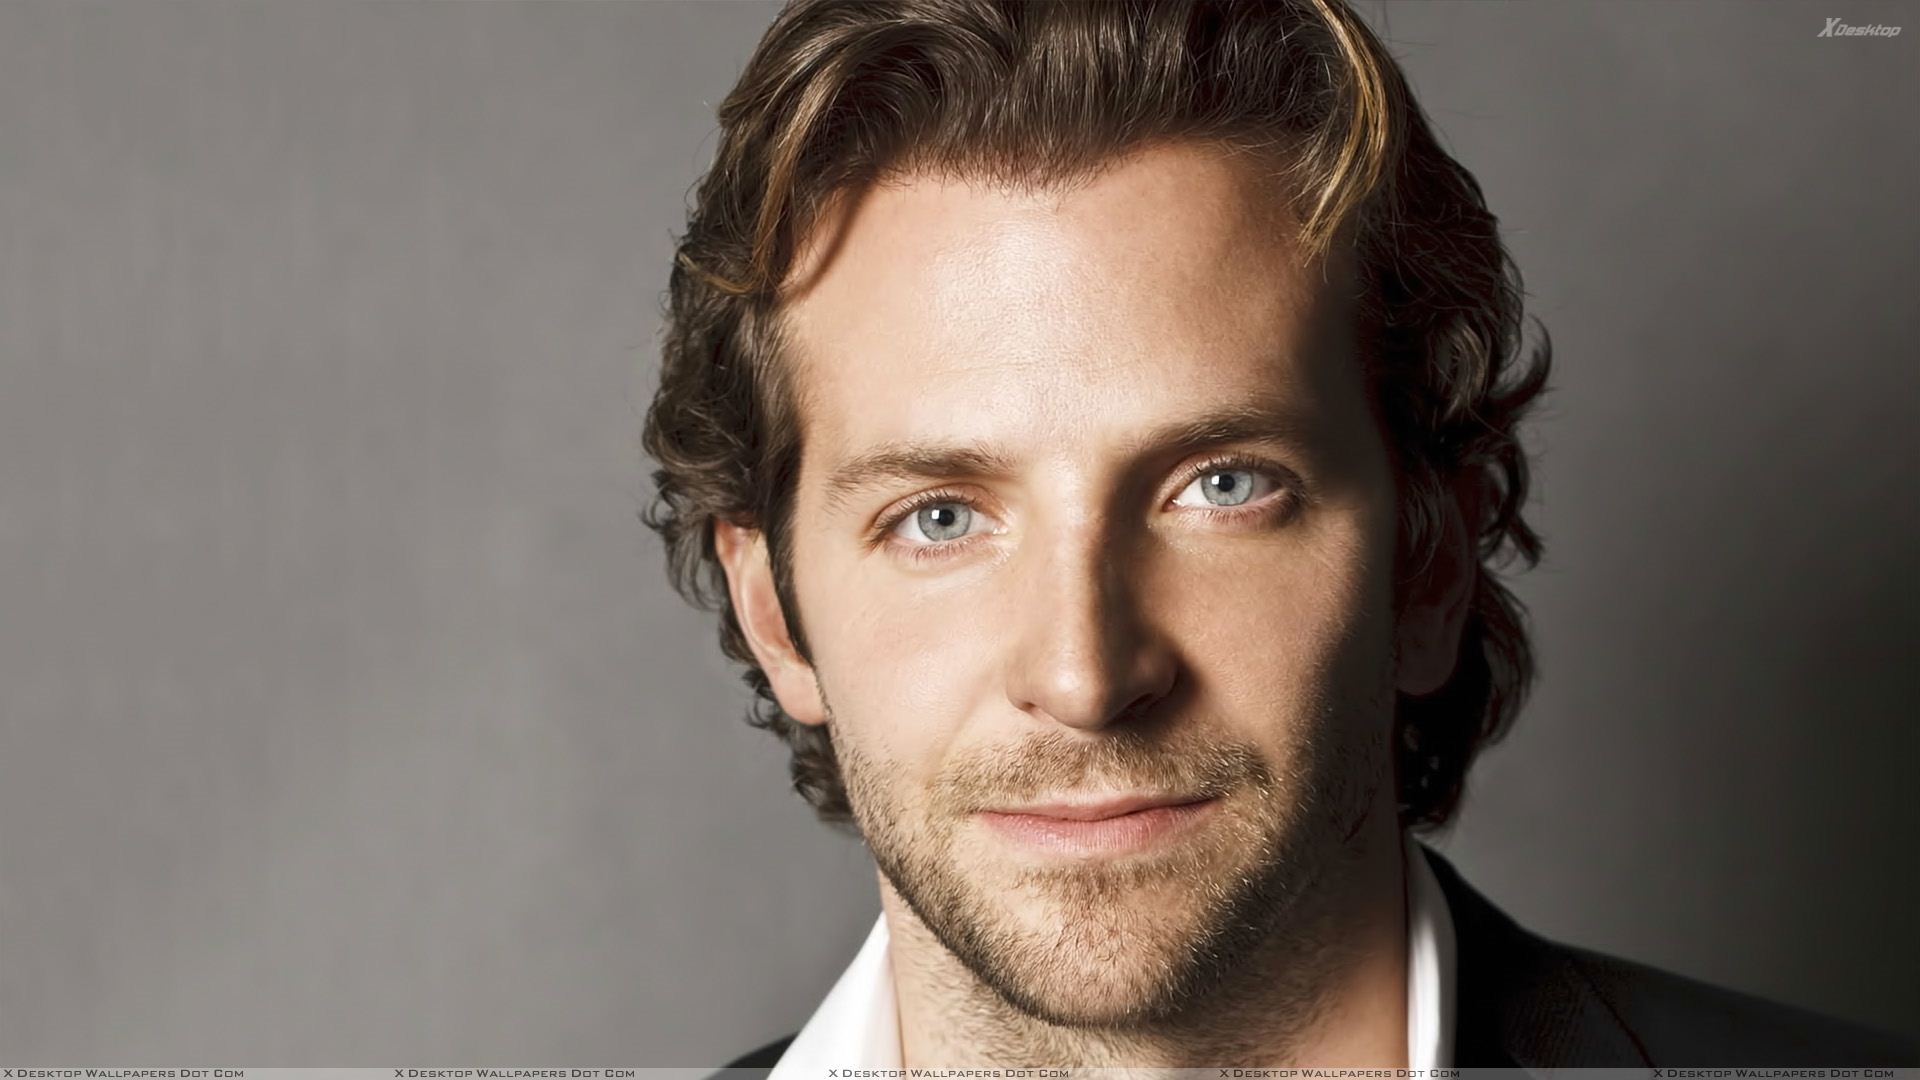 Bradley Cooper Wallpapers Photos Images in HD